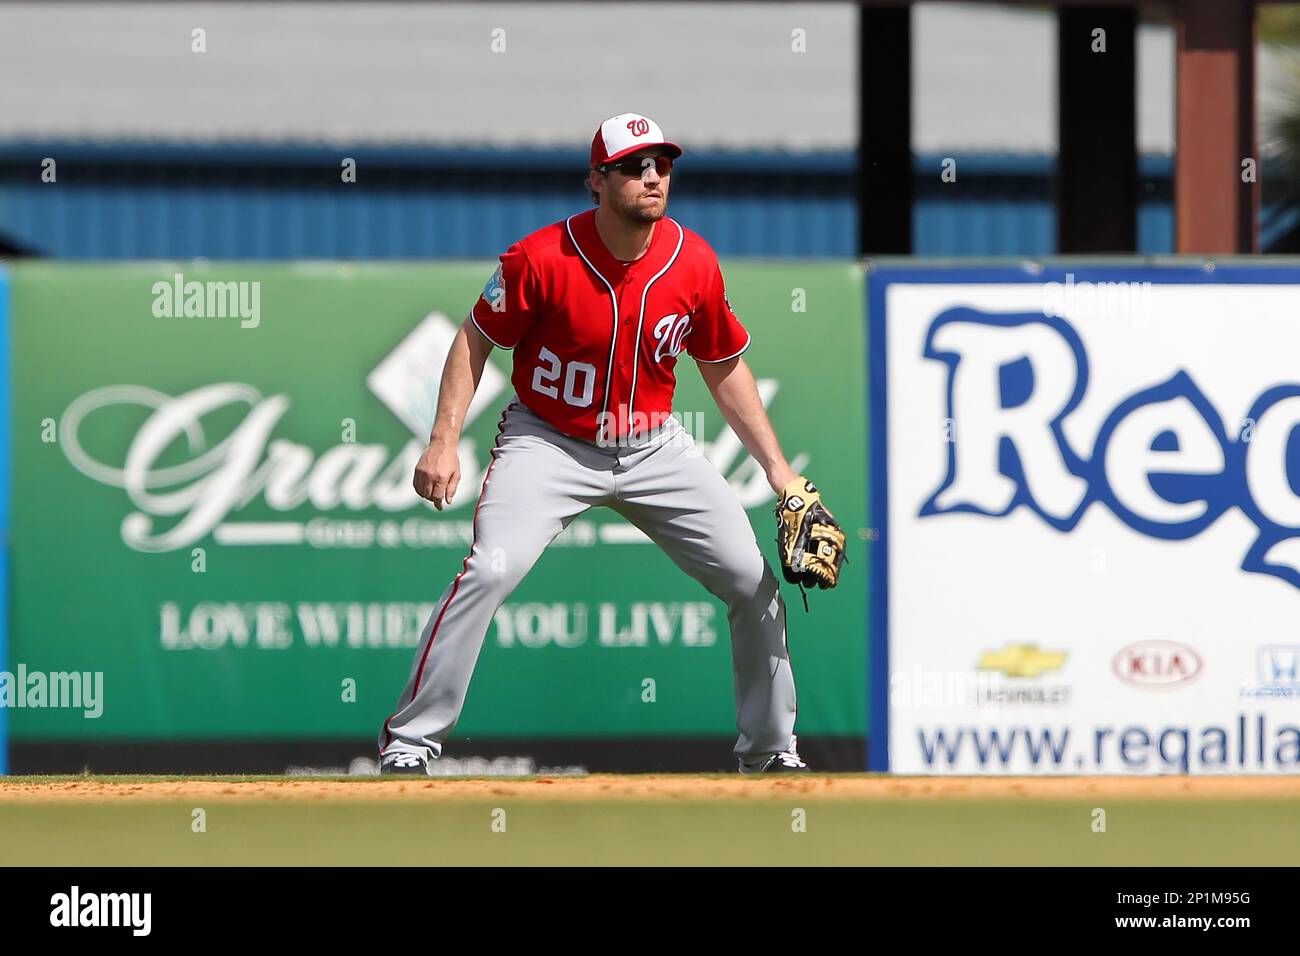 09 MAR 2016 Daniel Murphy of the Nationals during the spring training game between the Washington Nationals and the Detroit Tigers at Joker Marchant Stadium in Lakeland, Florida